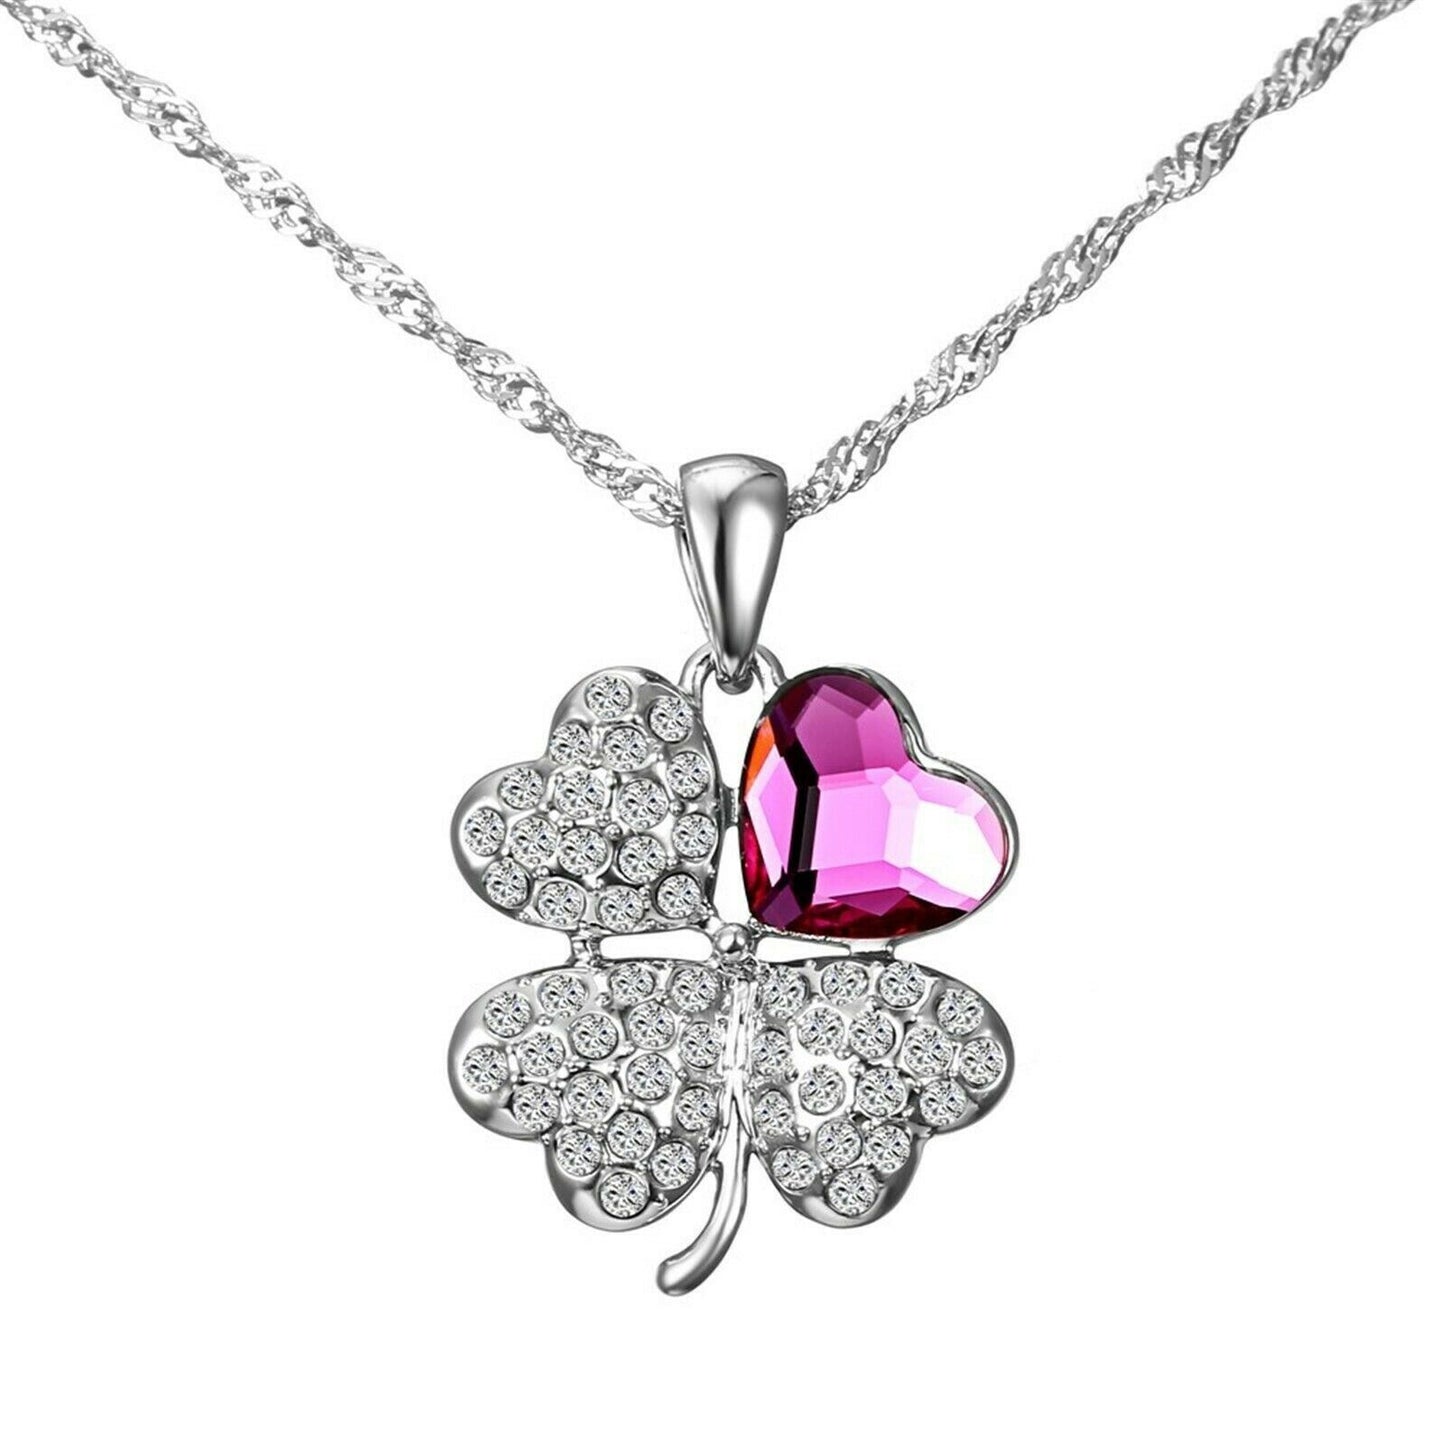 Rhinestone Heart Lucky 4 Leaf Clover Necklace - Made with Swarovski® Crystals